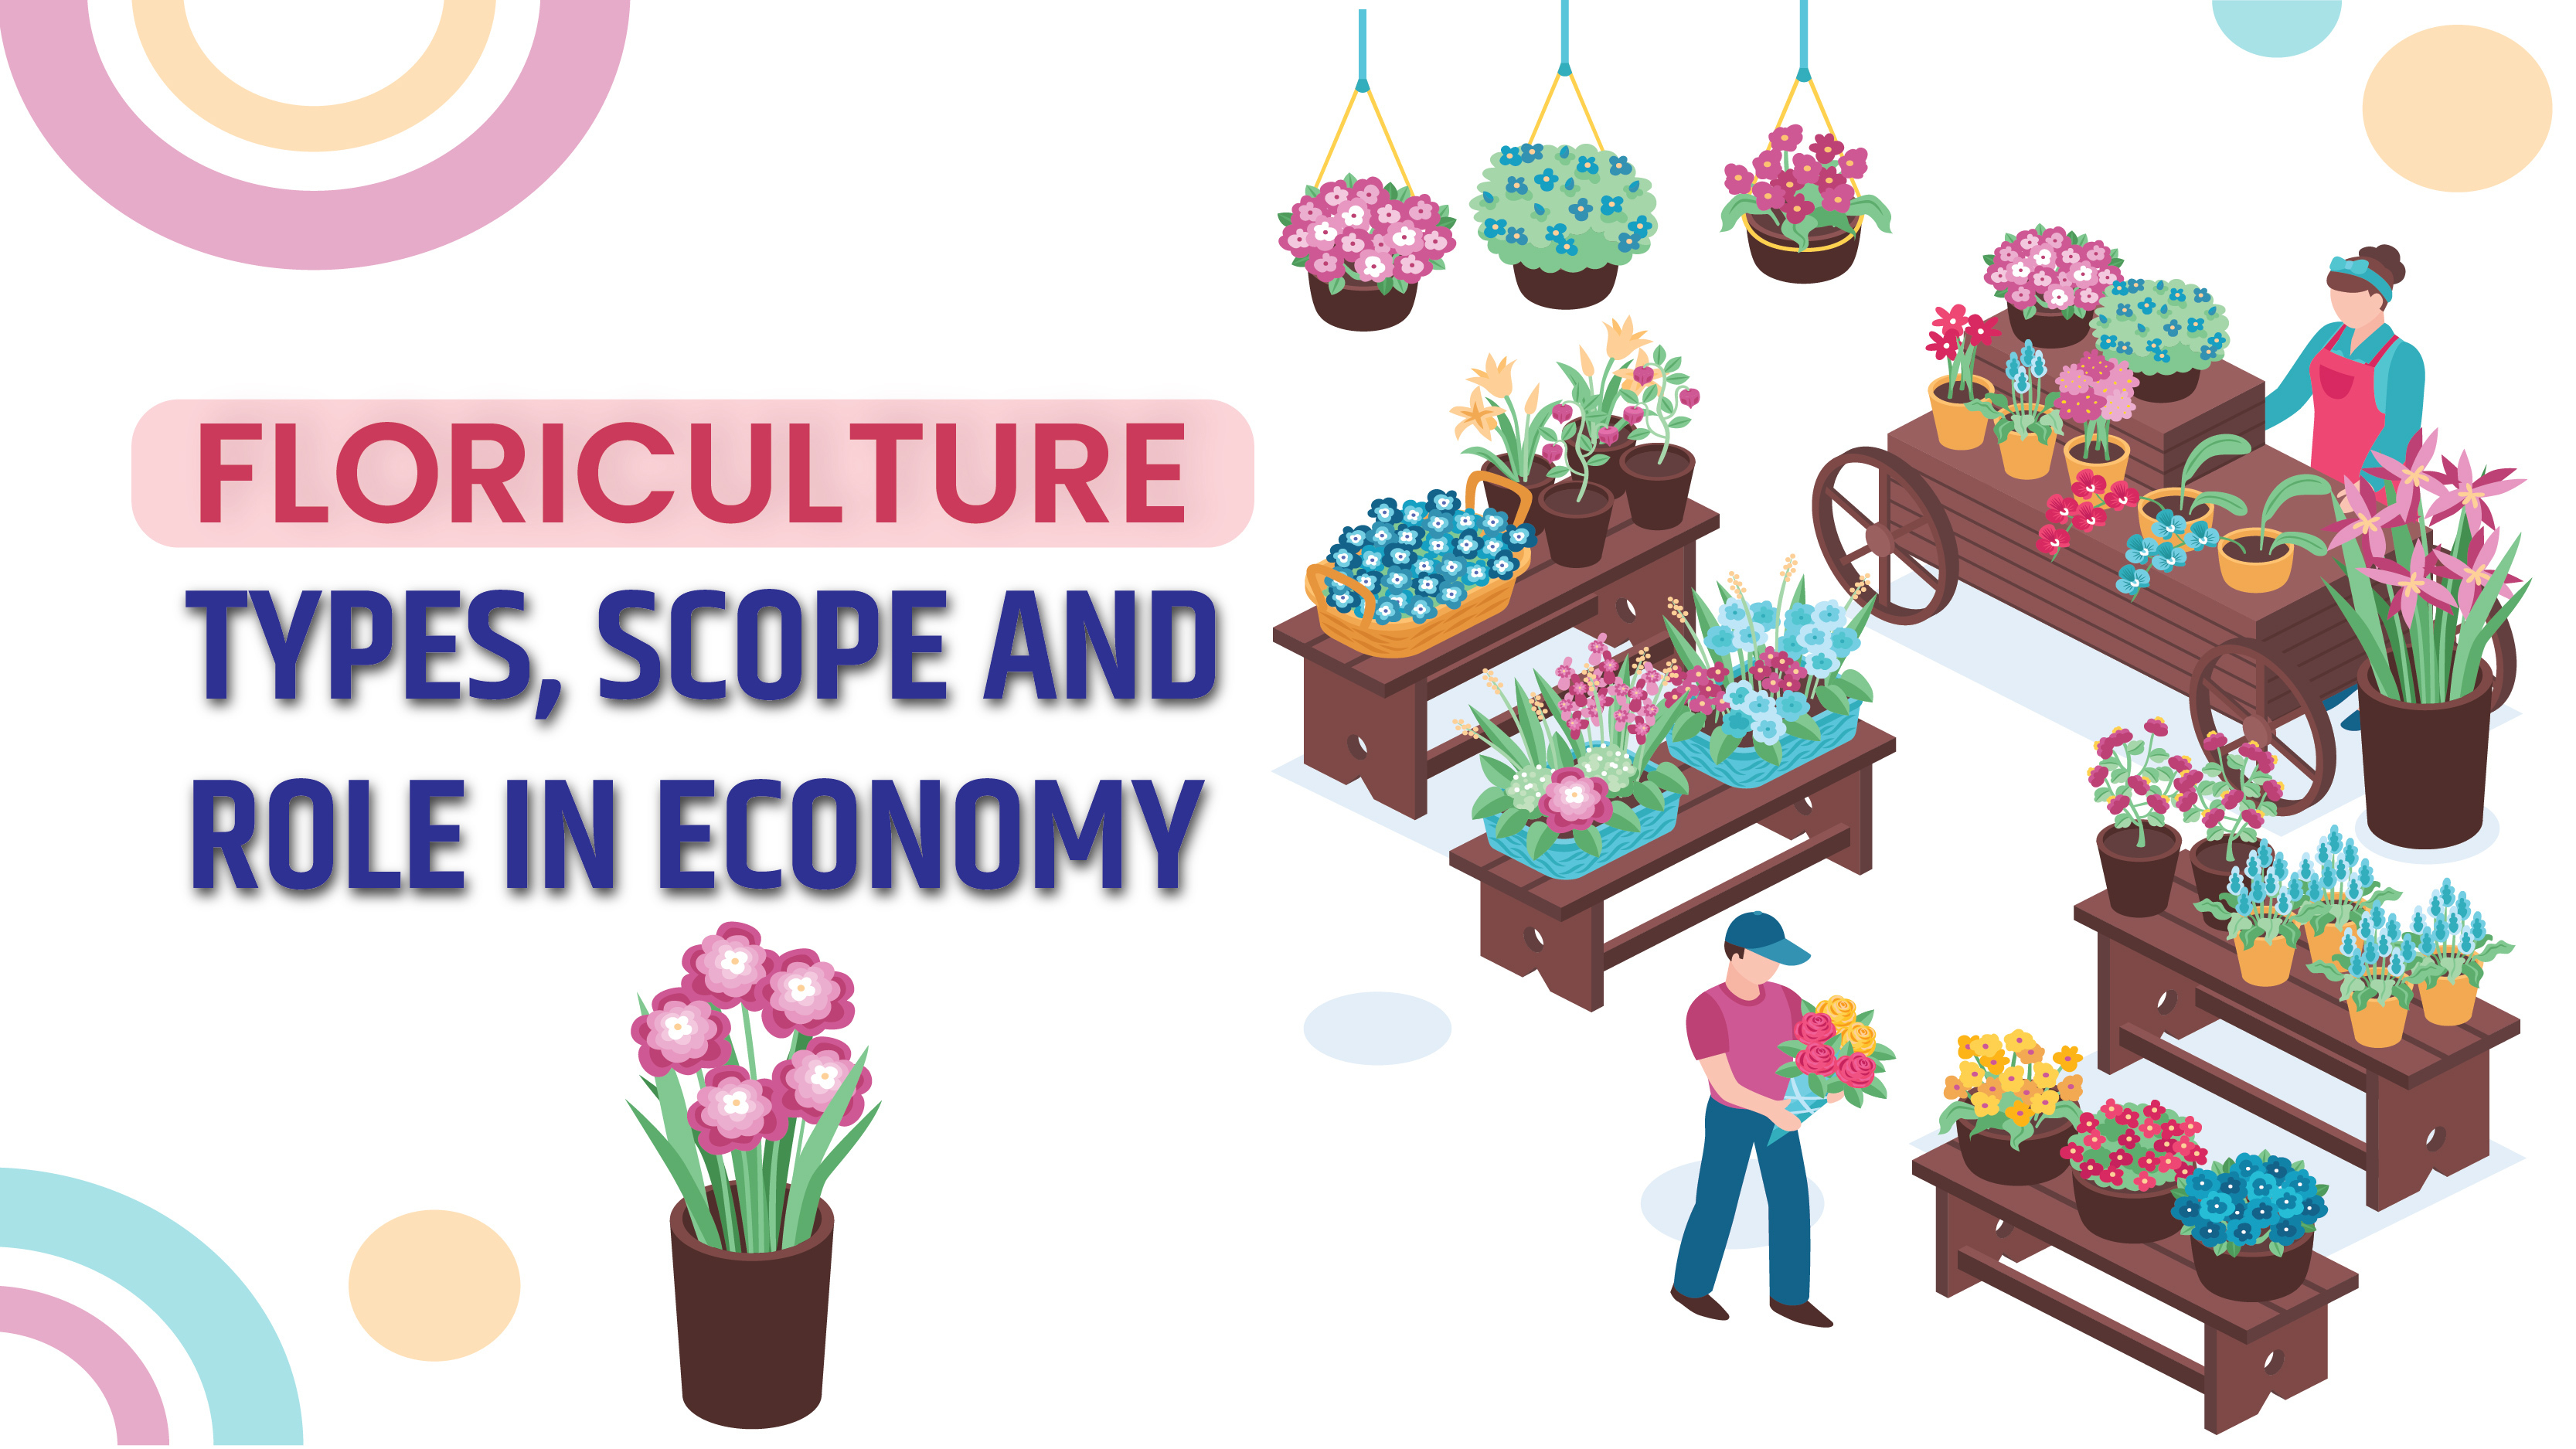 Floriculture: Types, Scope and Role in Economy